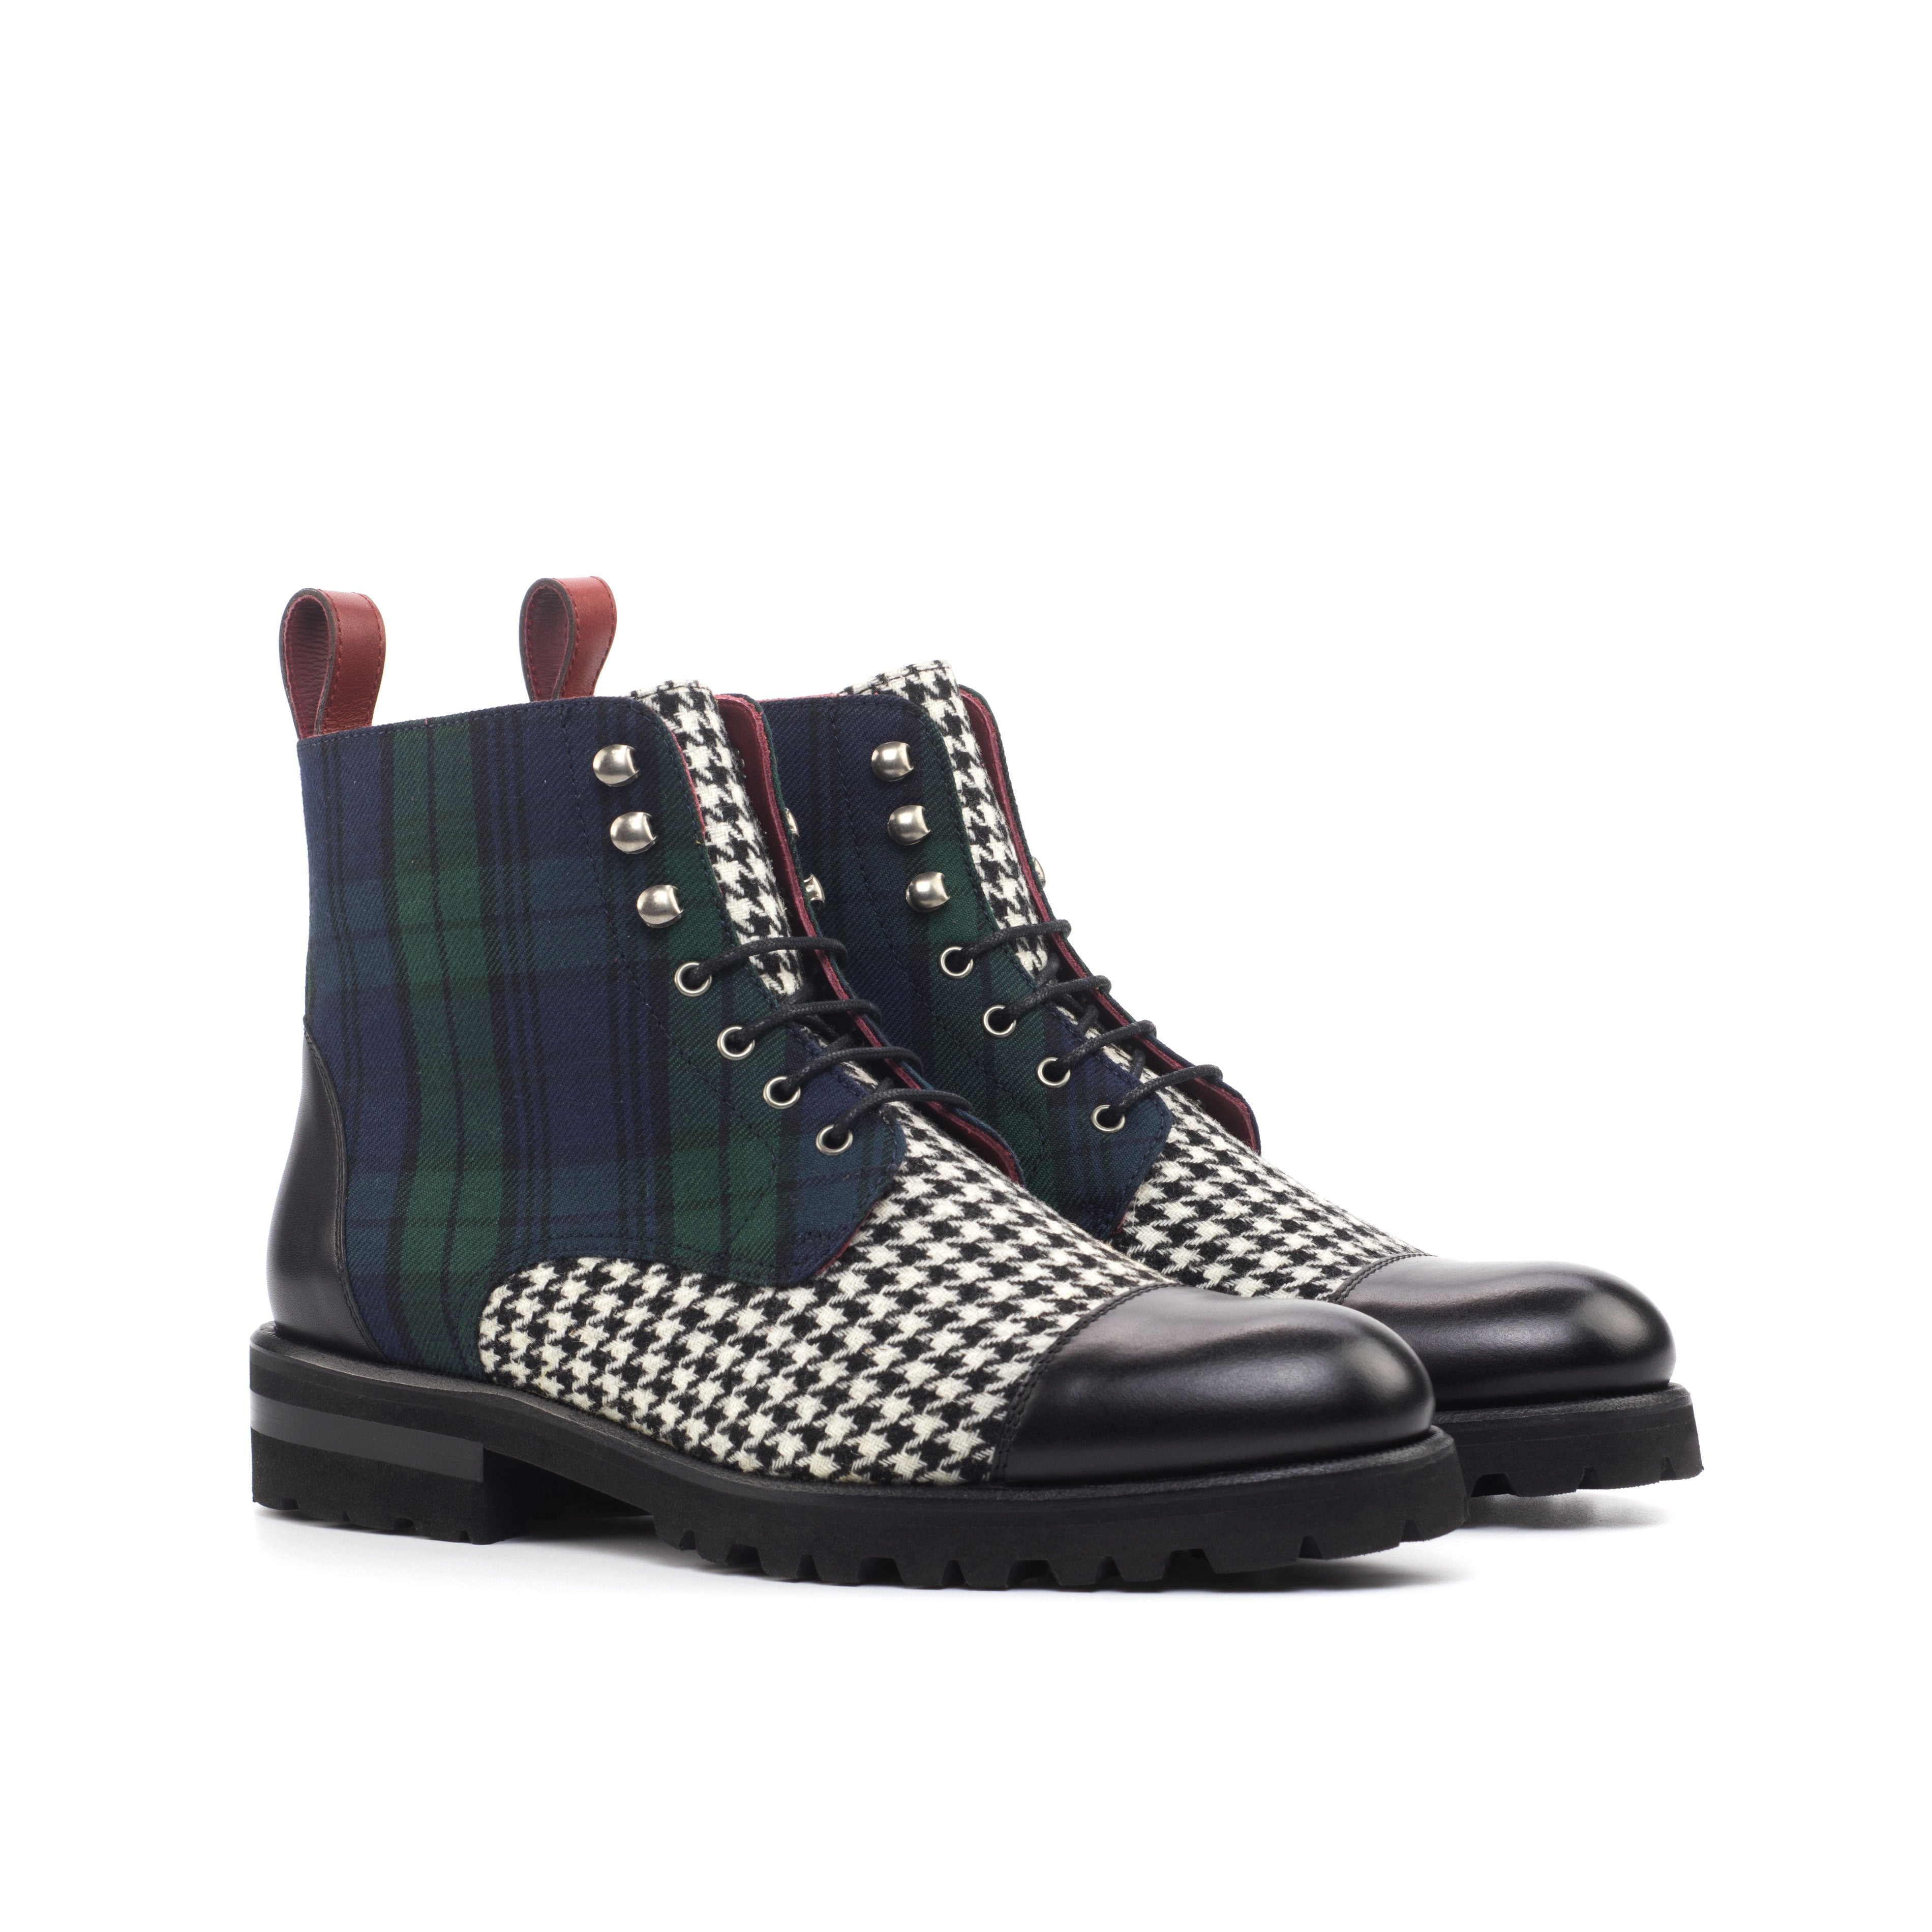 Blackwatch & Houndstooth Lace Up Boot